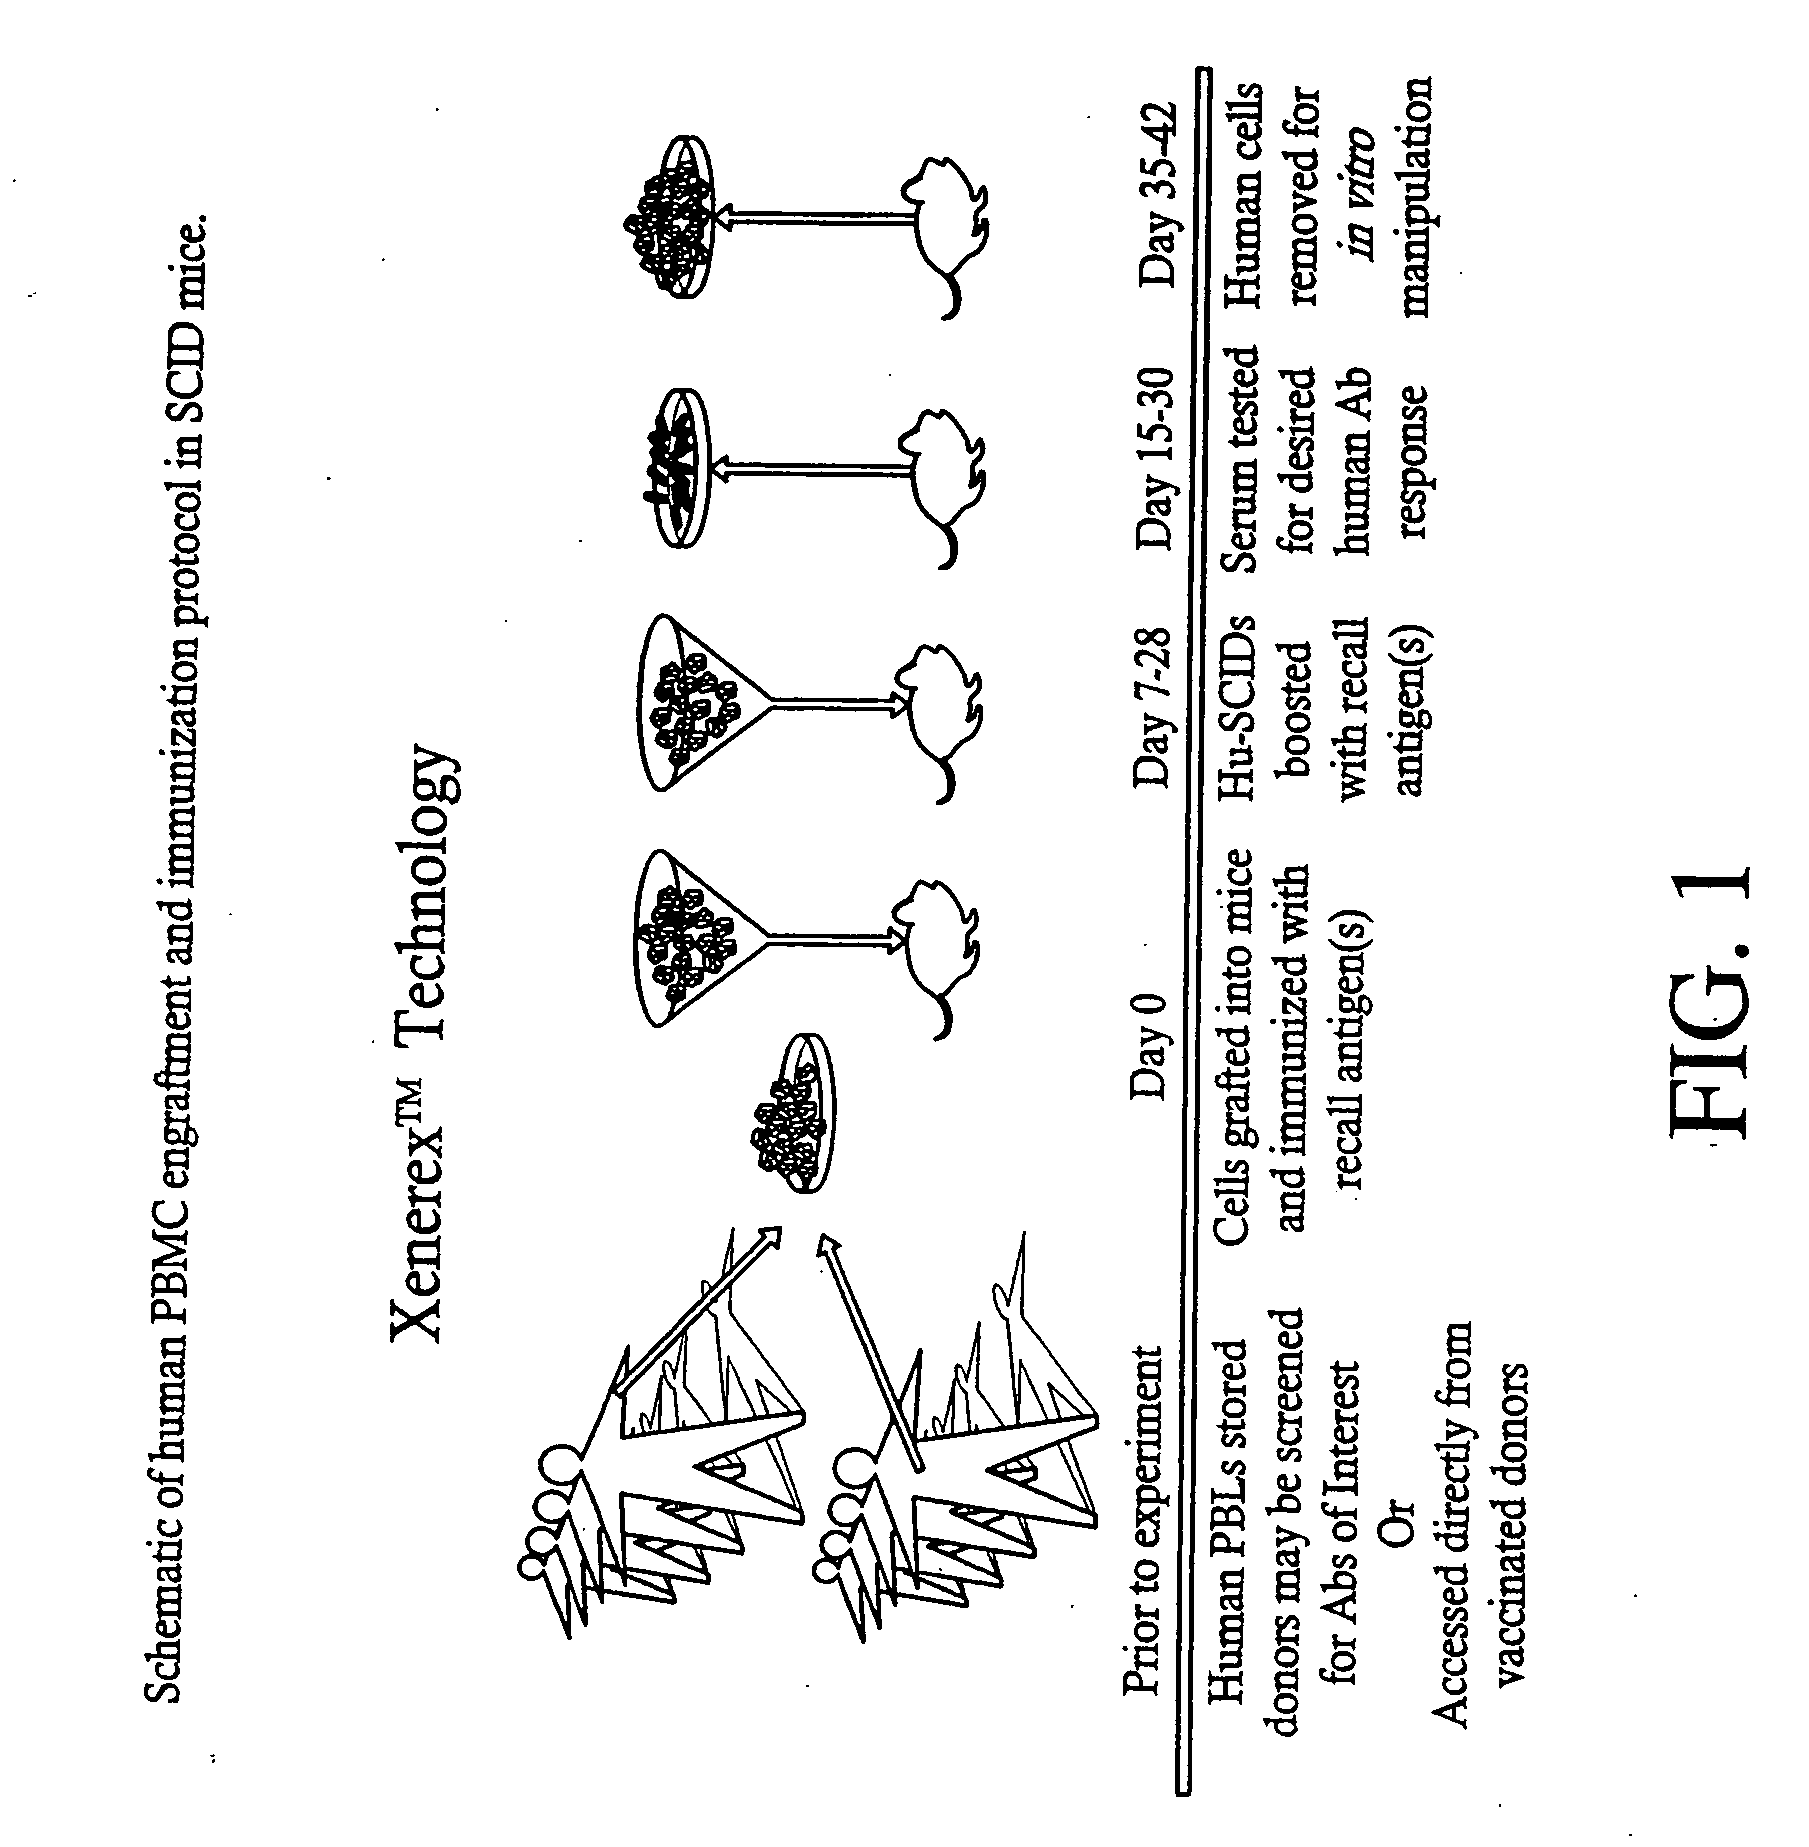 Antibodies against protective antigen and methods of use for passive immunization and treatment of anthrax